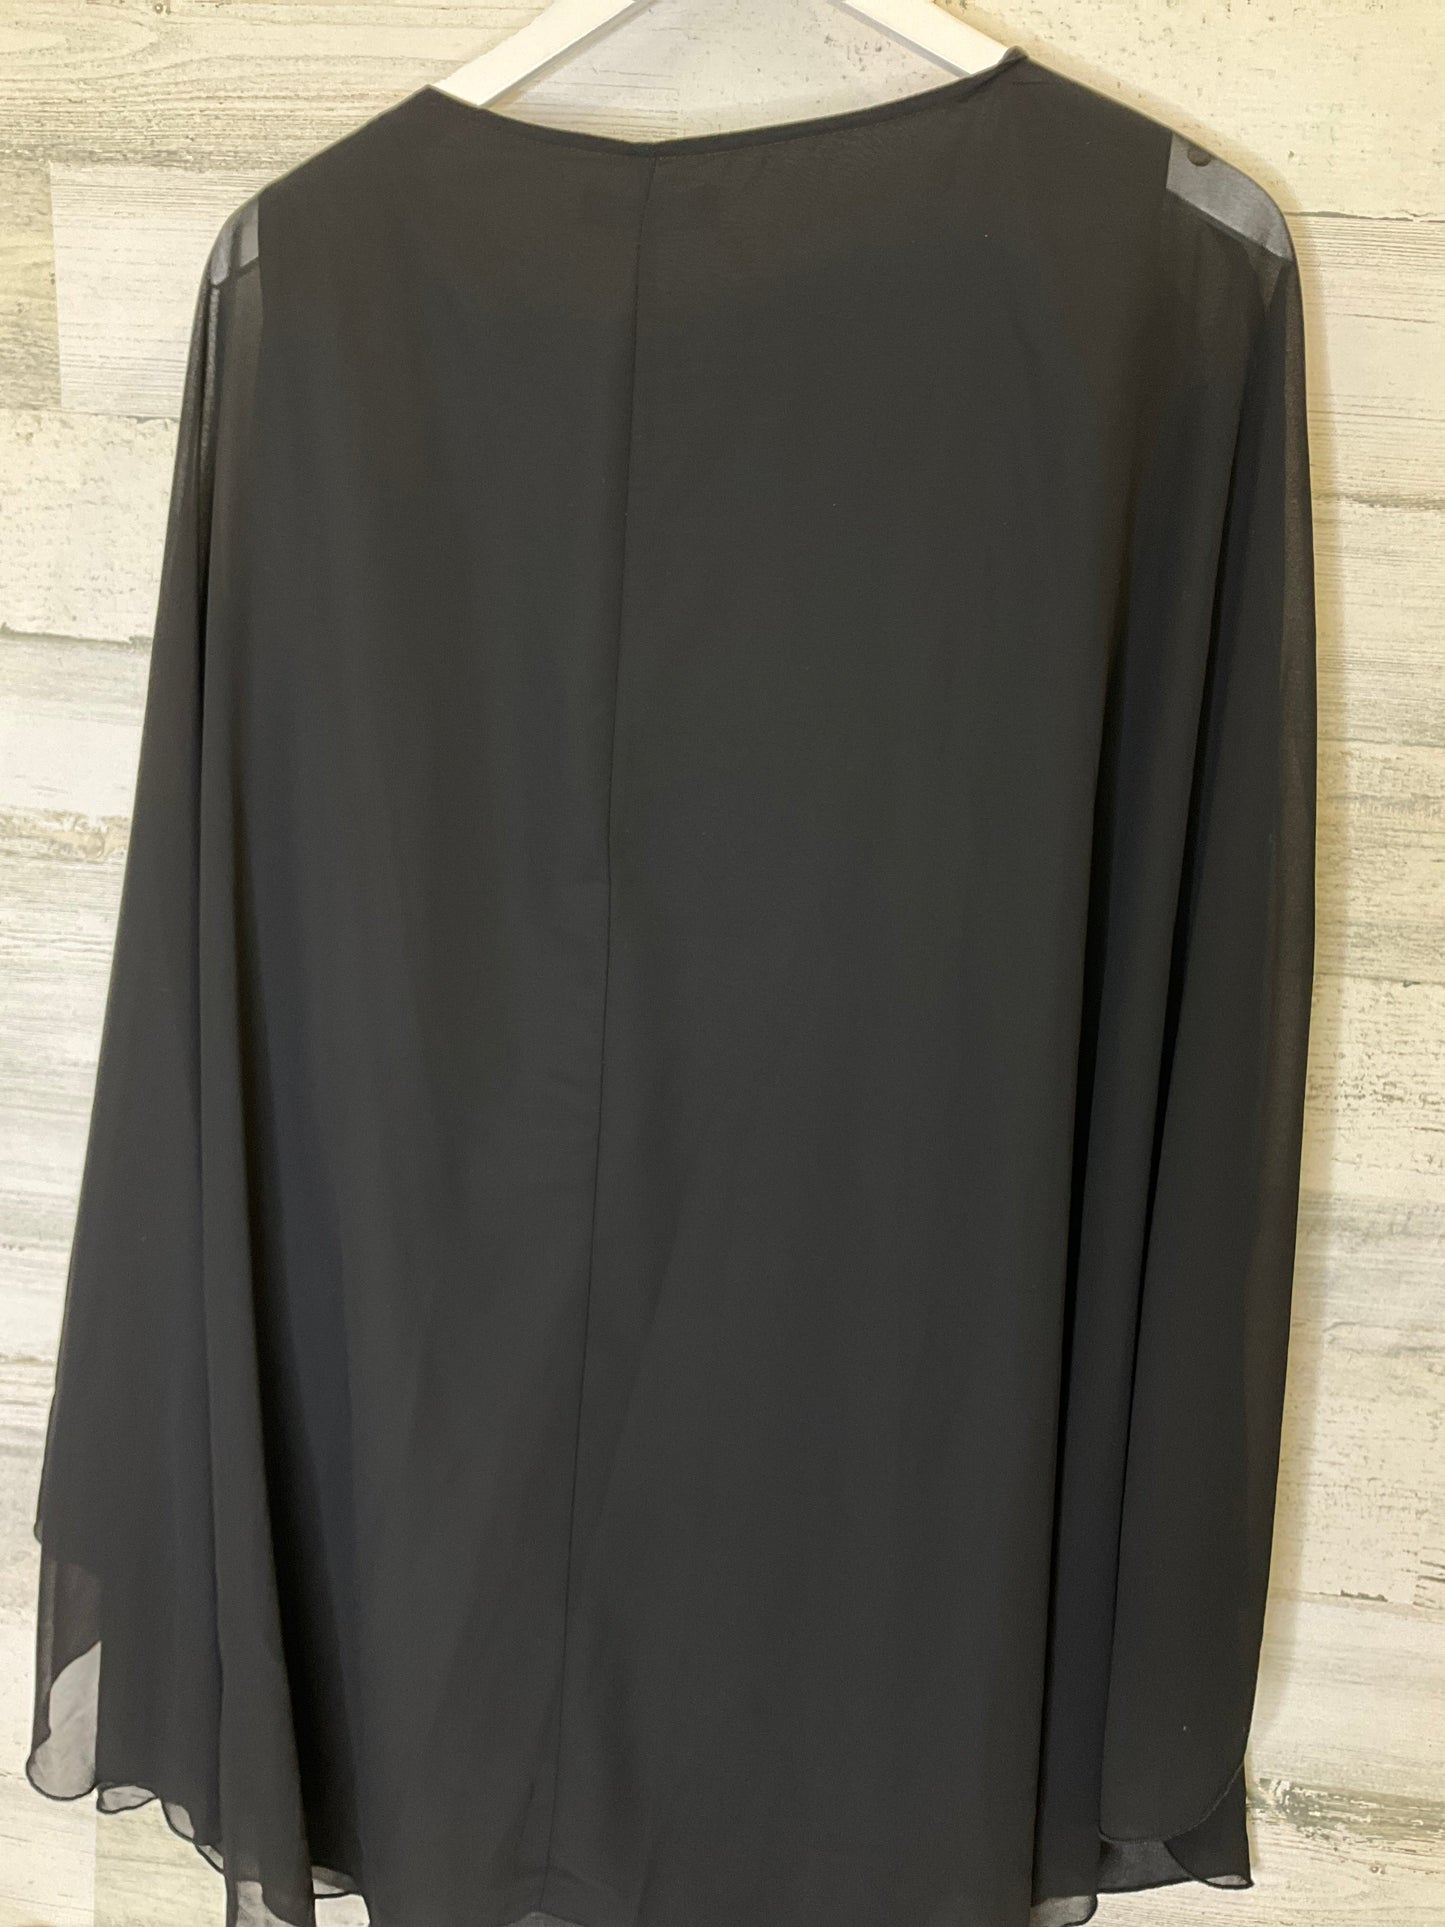 Black Blouse 3/4 Sleeve Clothes Mentor, Size 4x